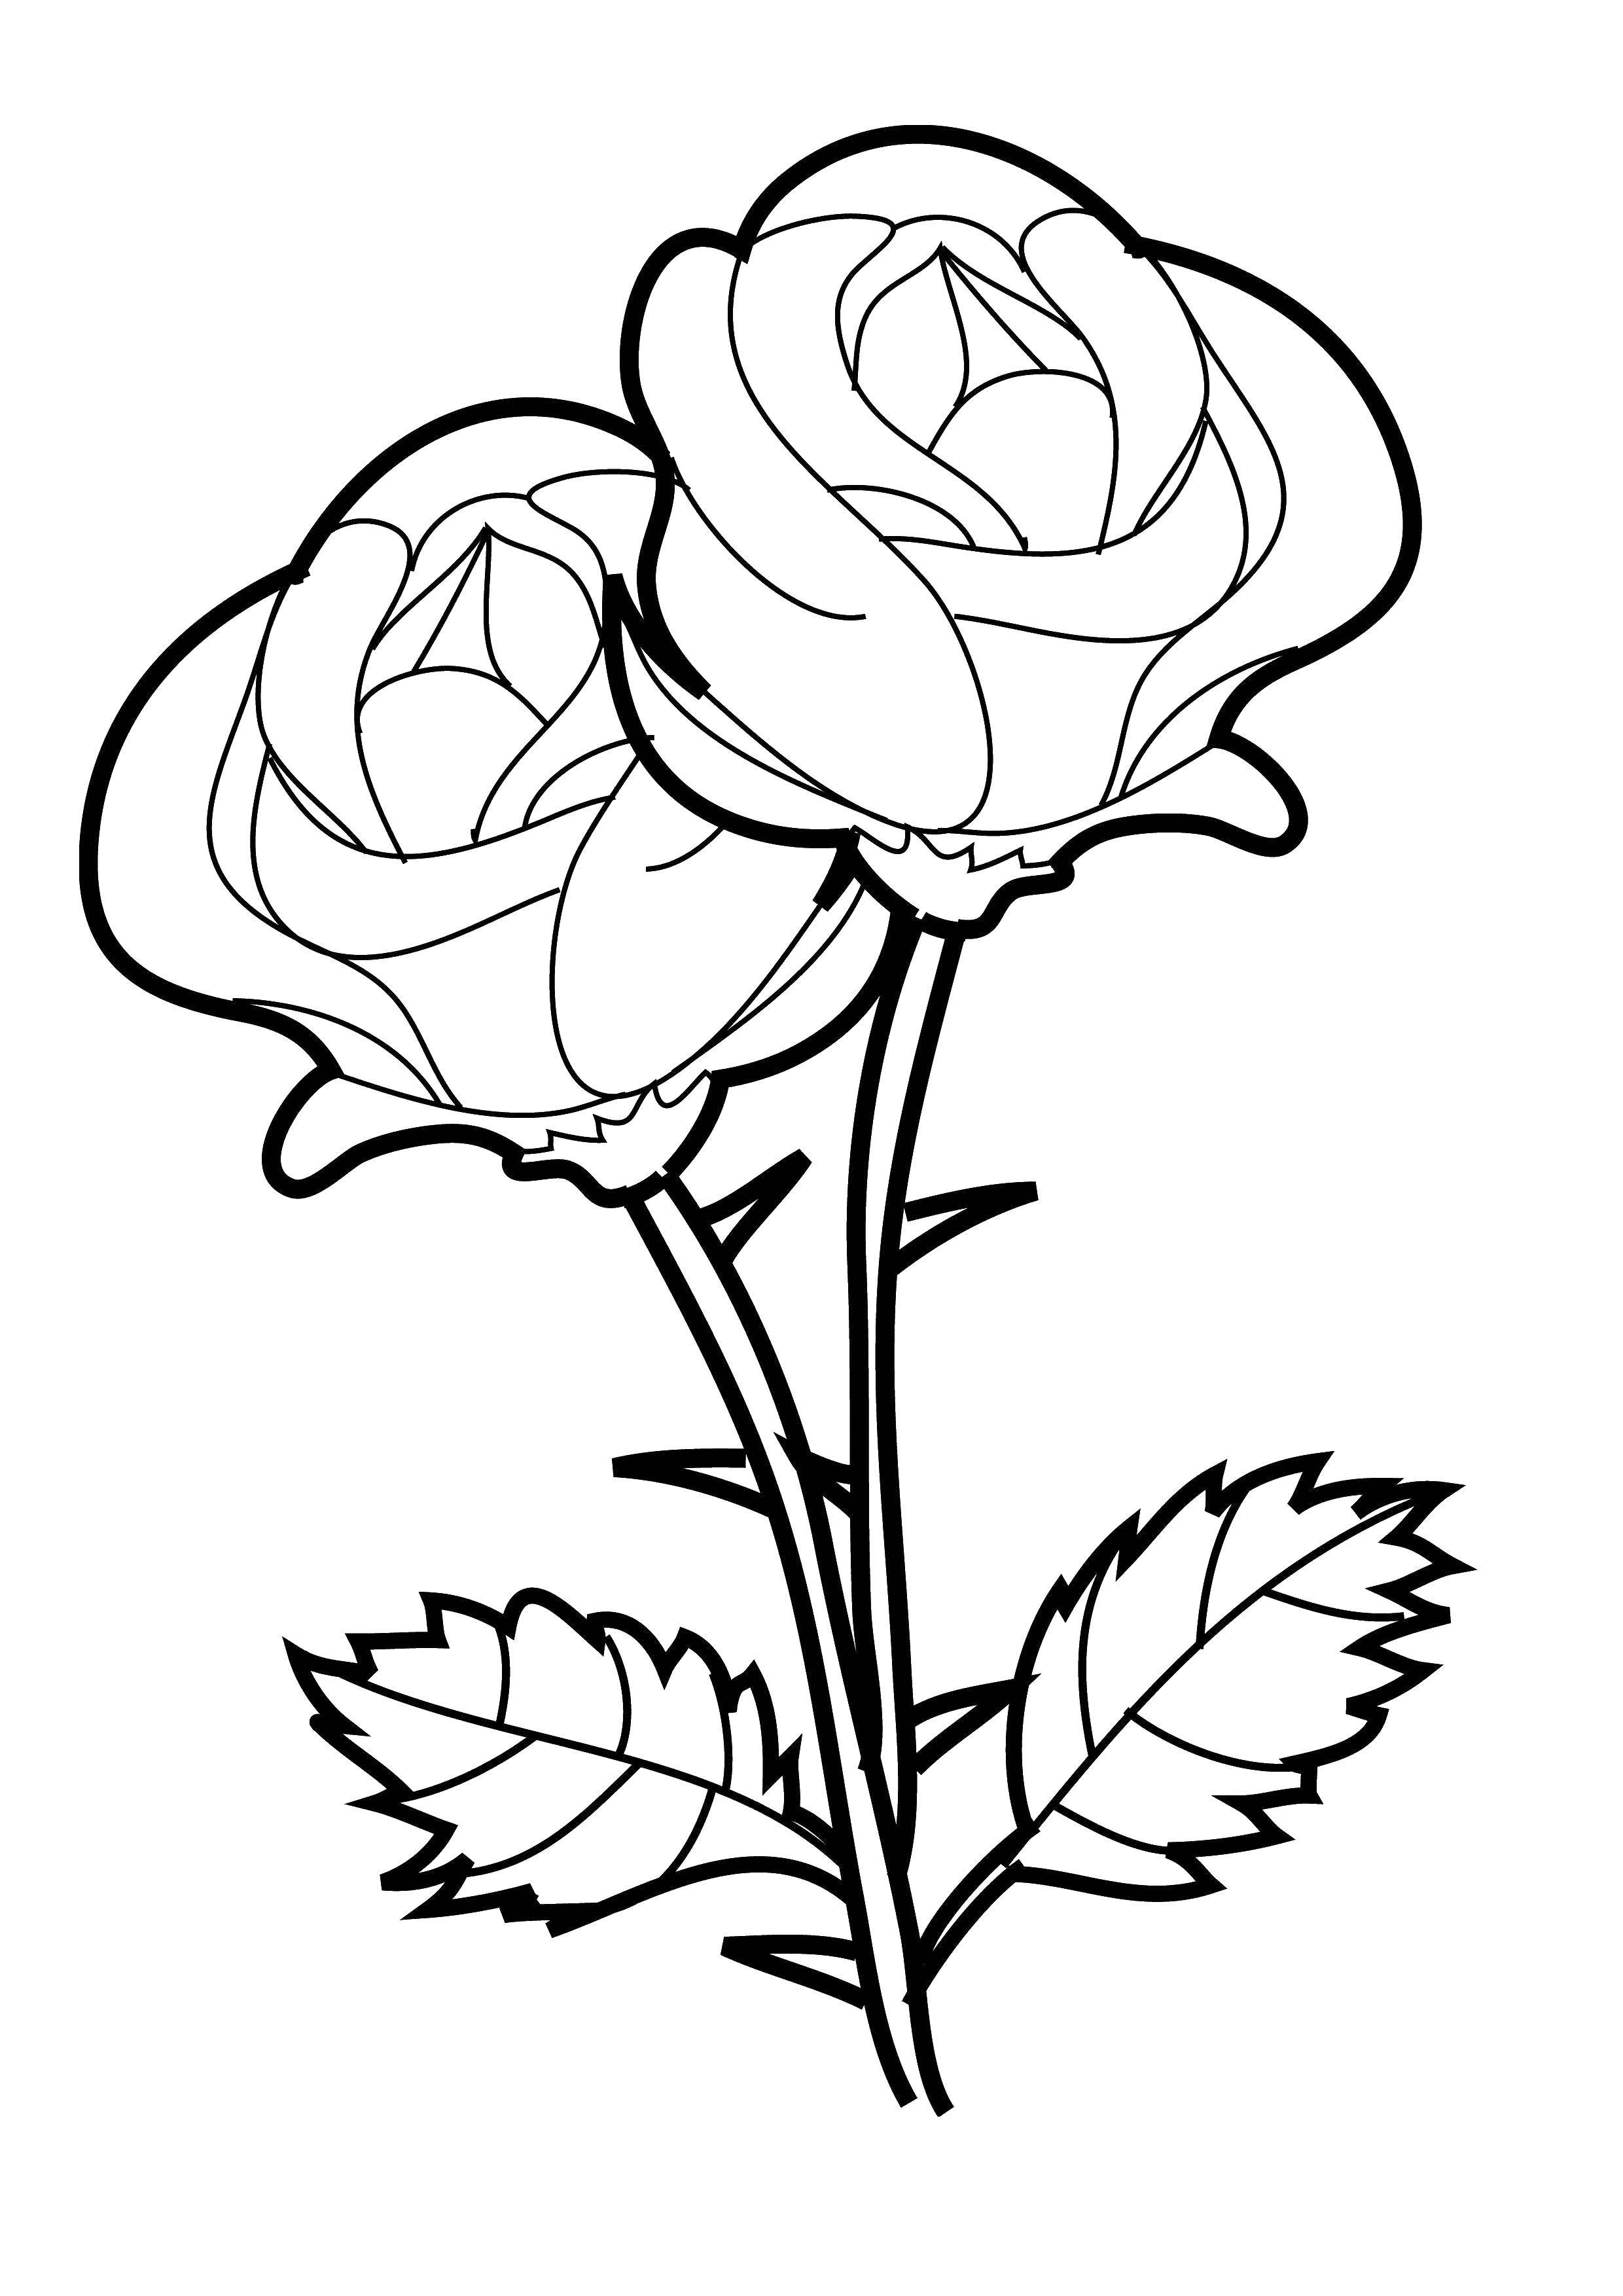 Coloring Two roses. Category The contours of a rose. Tags:  Flowers, roses.